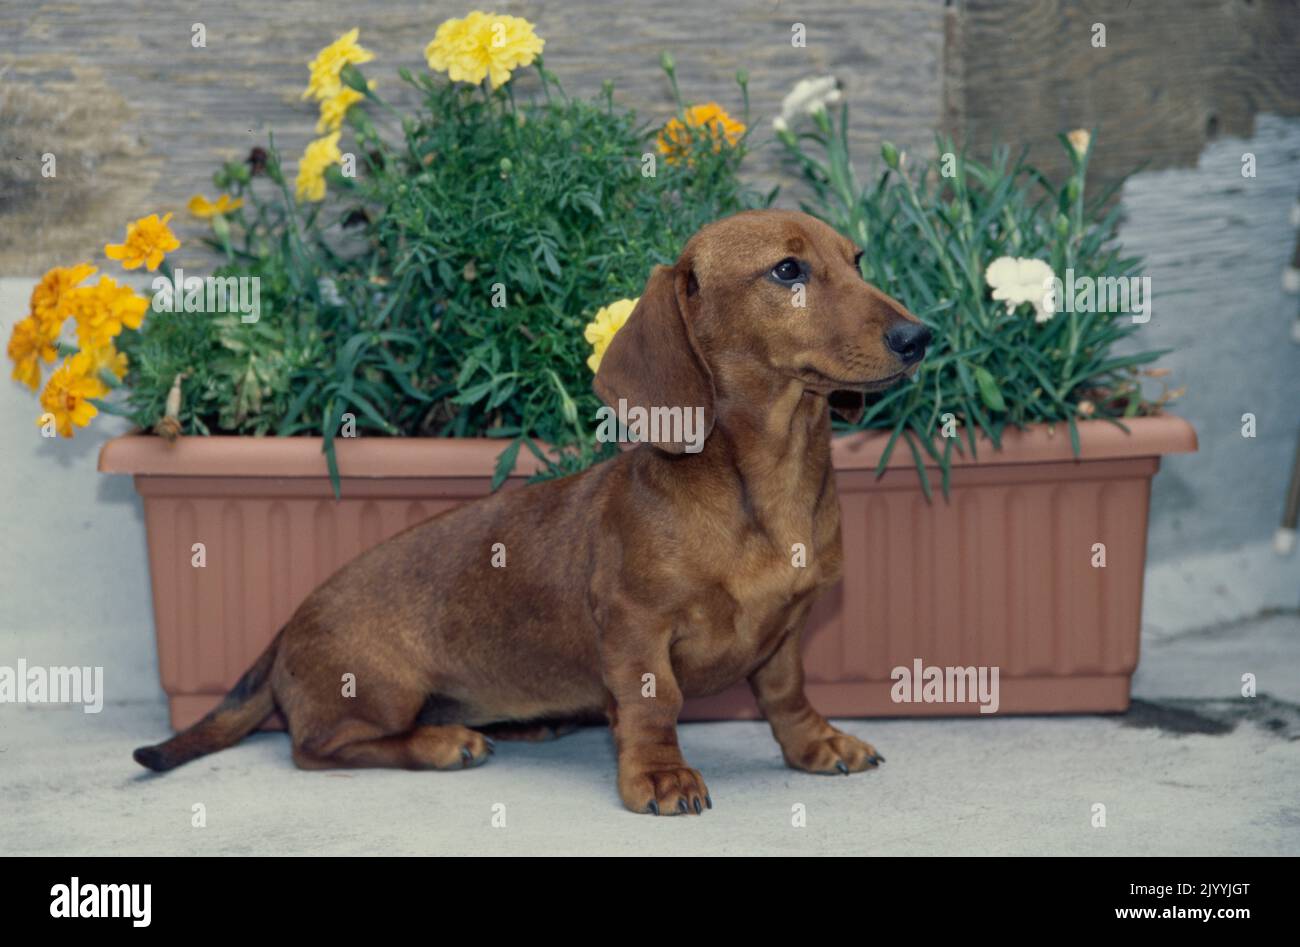 Dachshund in front of flower pot Stock Photo